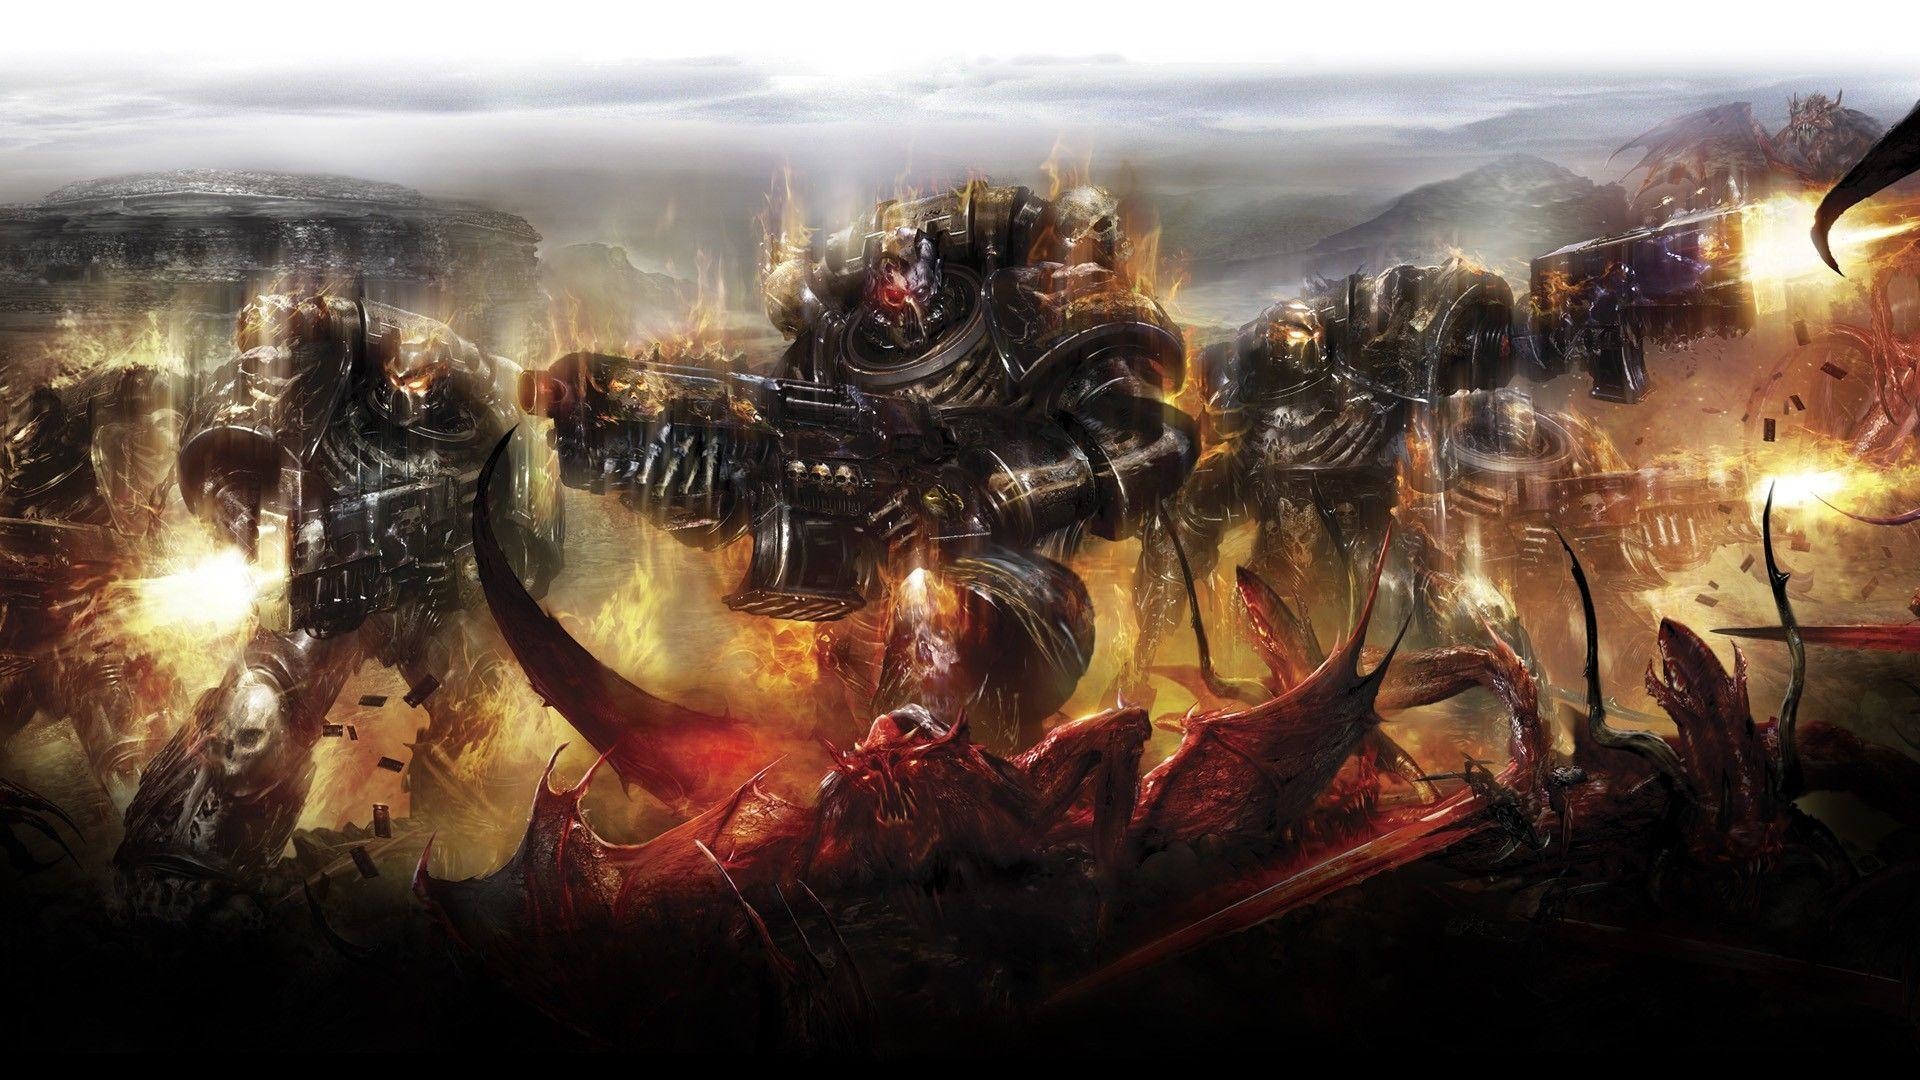 Wallpapers And Other Space Marine Related Art. Warhammer 40,000